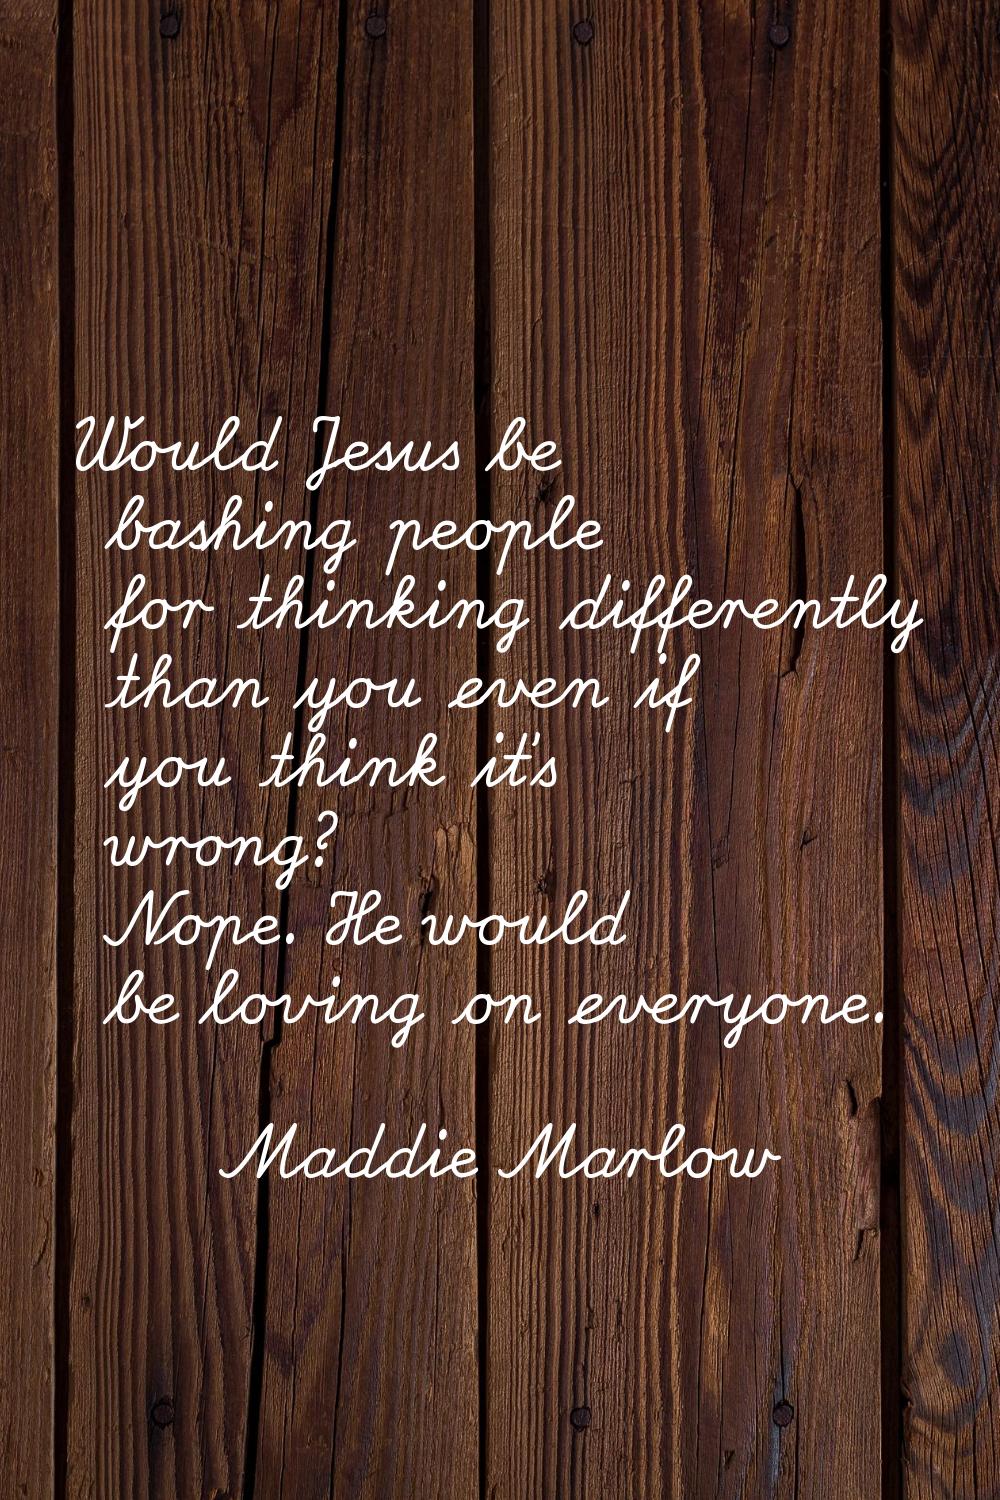 Would Jesus be bashing people for thinking differently than you even if you think it's wrong? Nope.